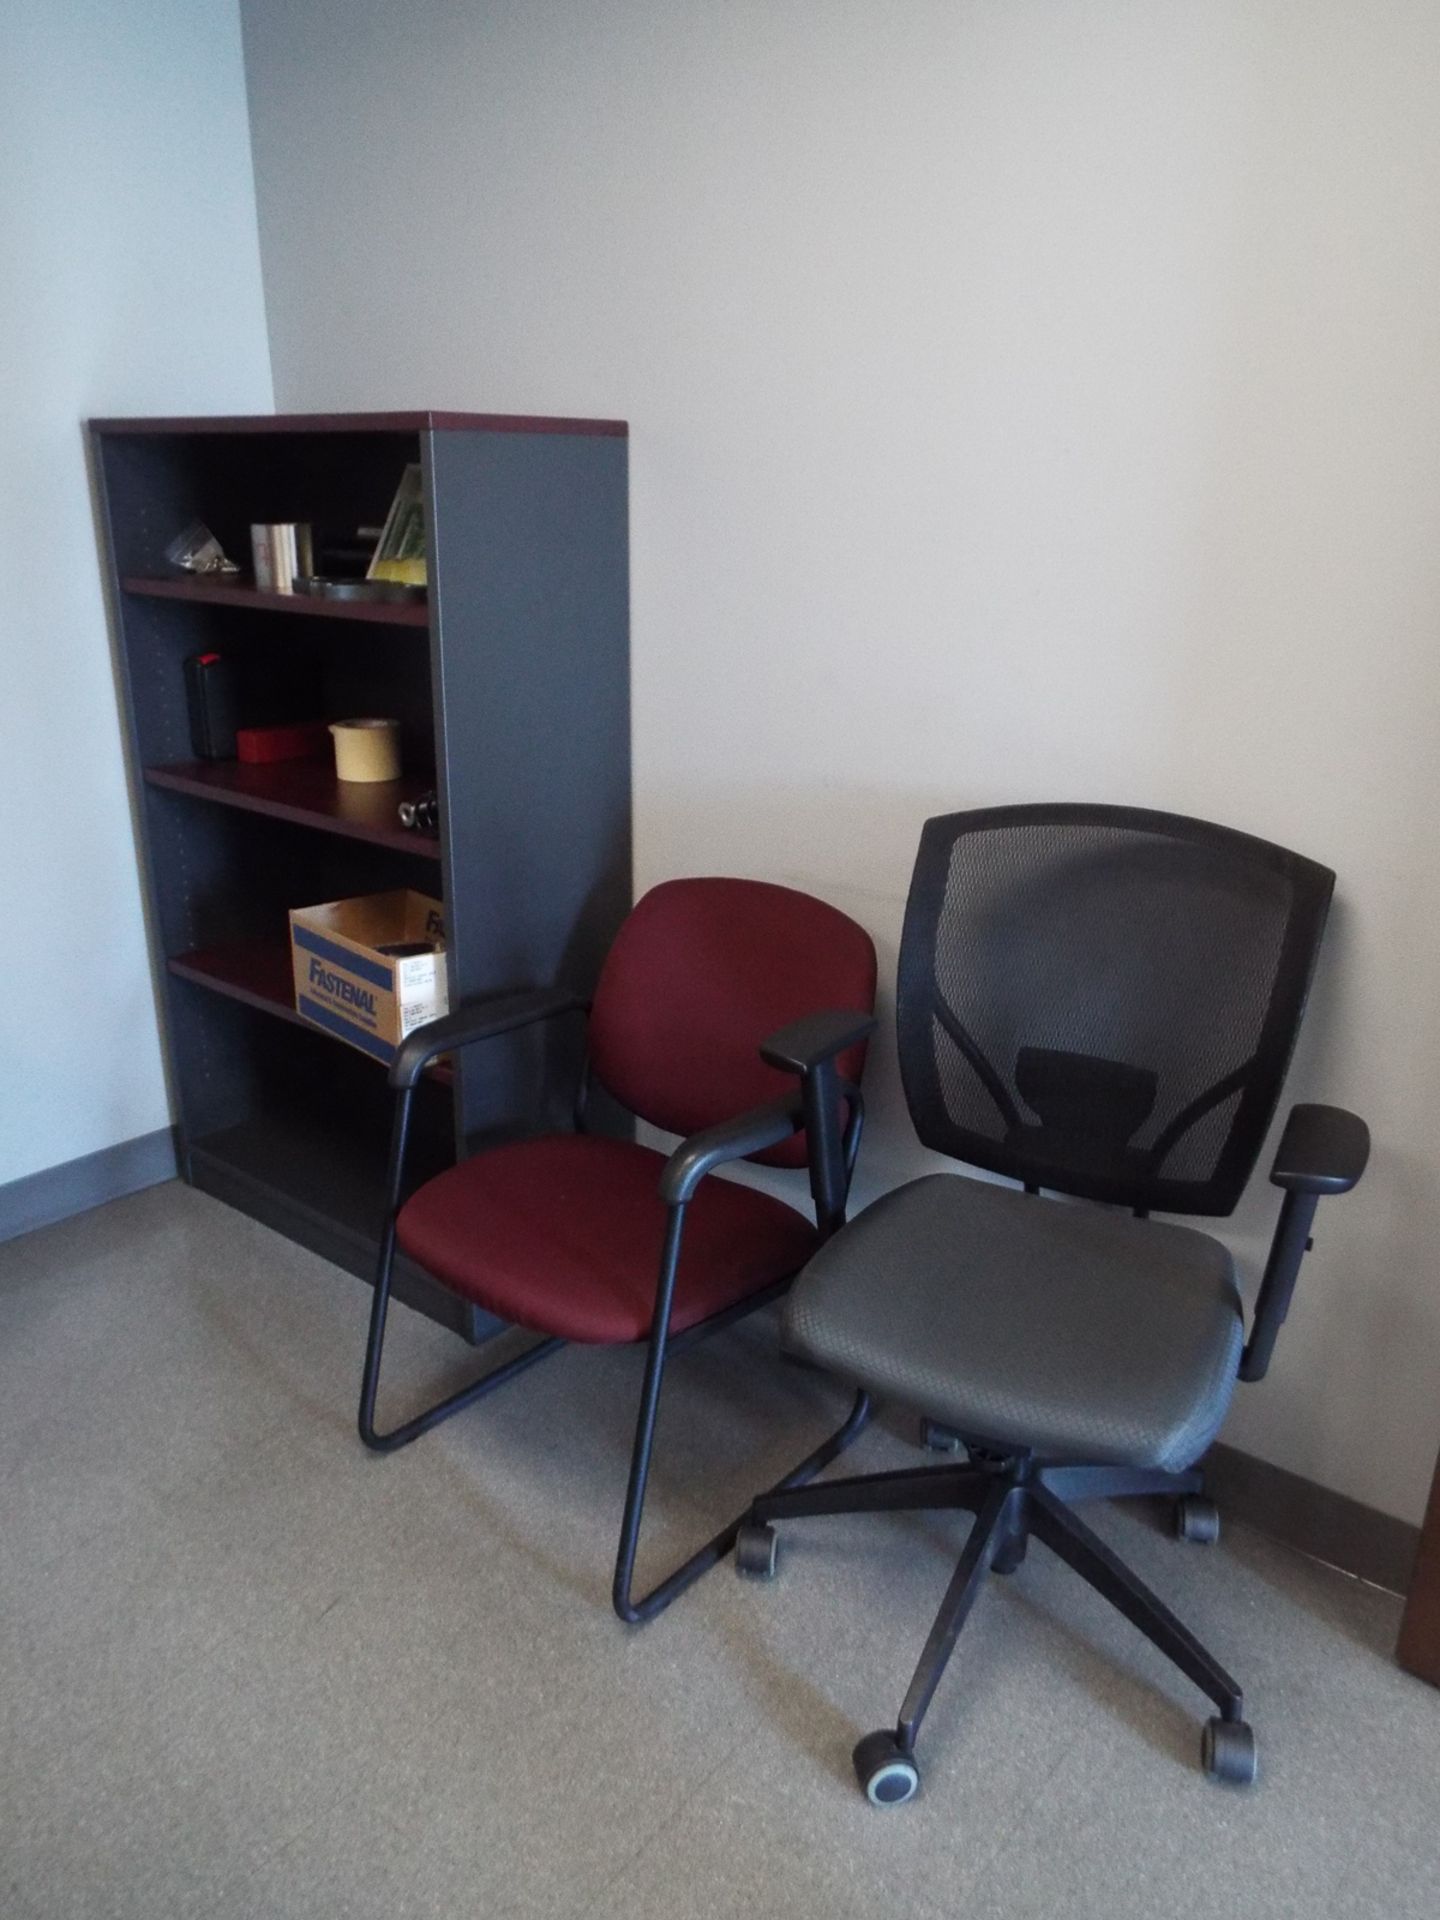 LOT/ CONTENTS OF OFFICE (FURNITURE ONLY) - L-SHAPED DESK, OFFICE CHAIRS, 2 DRAWER LATERAL FILE - Image 2 of 2